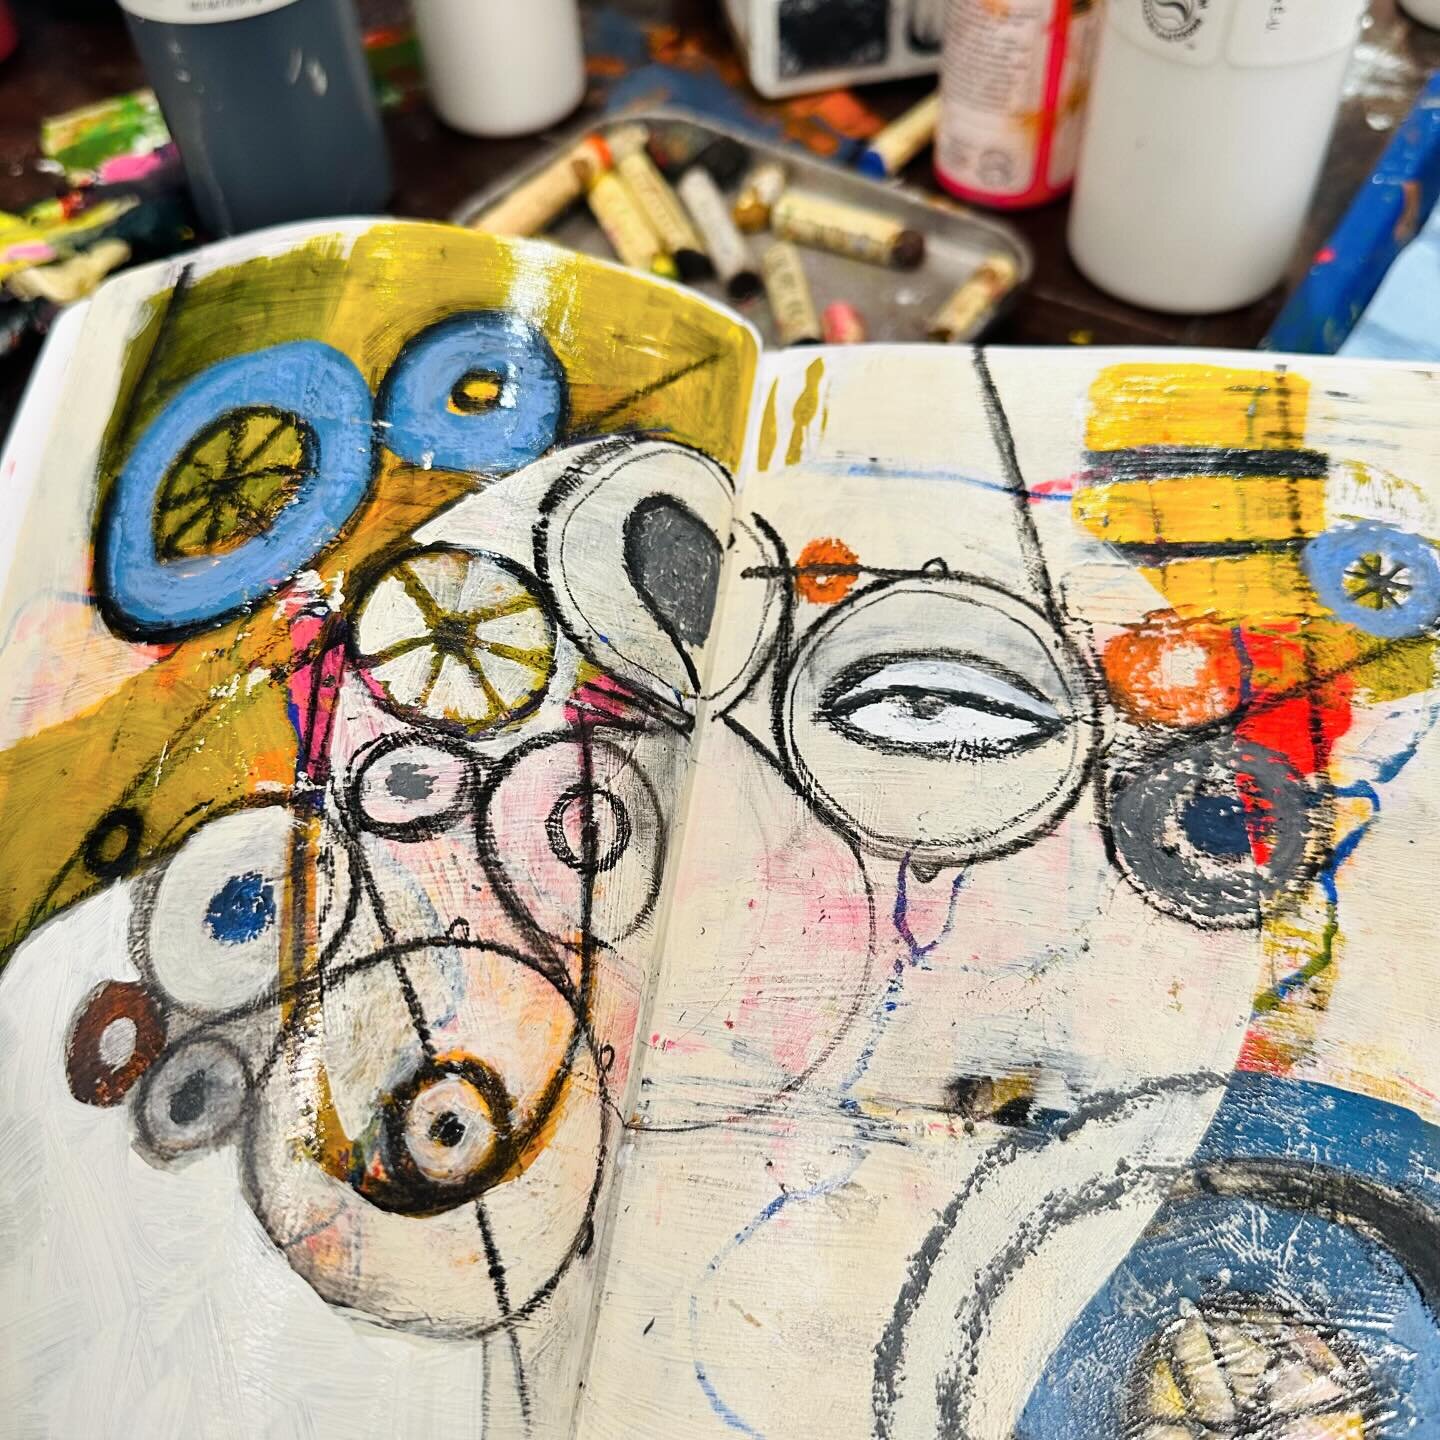 I should be shoveling snow right now, but da hell with that. Let&rsquo;s do this! Morning sketch. 

#robinfayegates #robinfayegatesart
#RFGA #denverartist #painting #whimsicalart #artinspiration #creativeprocess #creativepractice #coloradoartist #mix